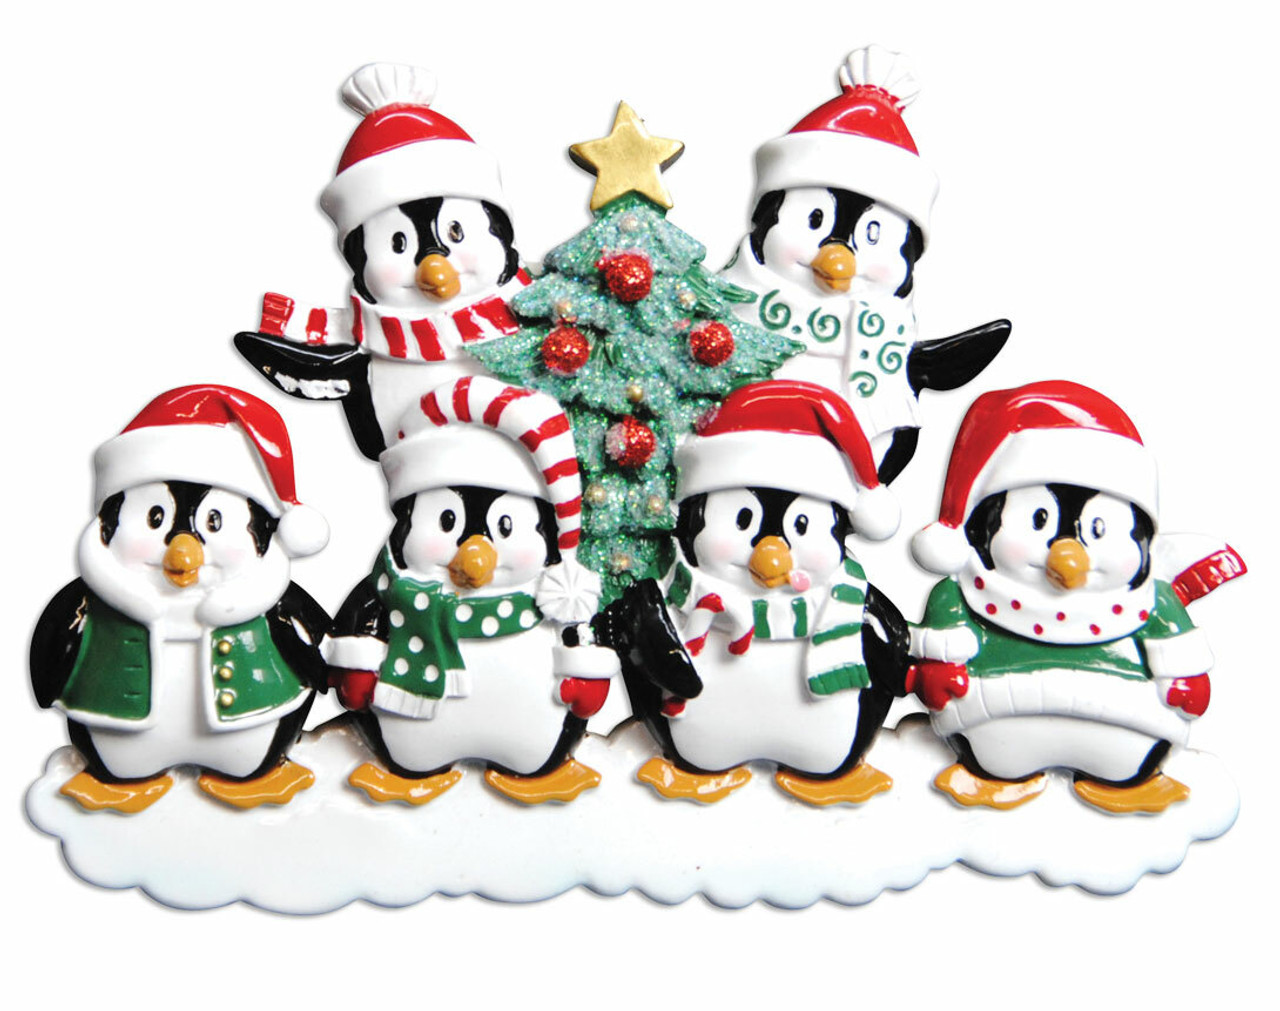 Personalized Snowman Family of 6 with 3 Dogs or Cats Christmas Ornament 